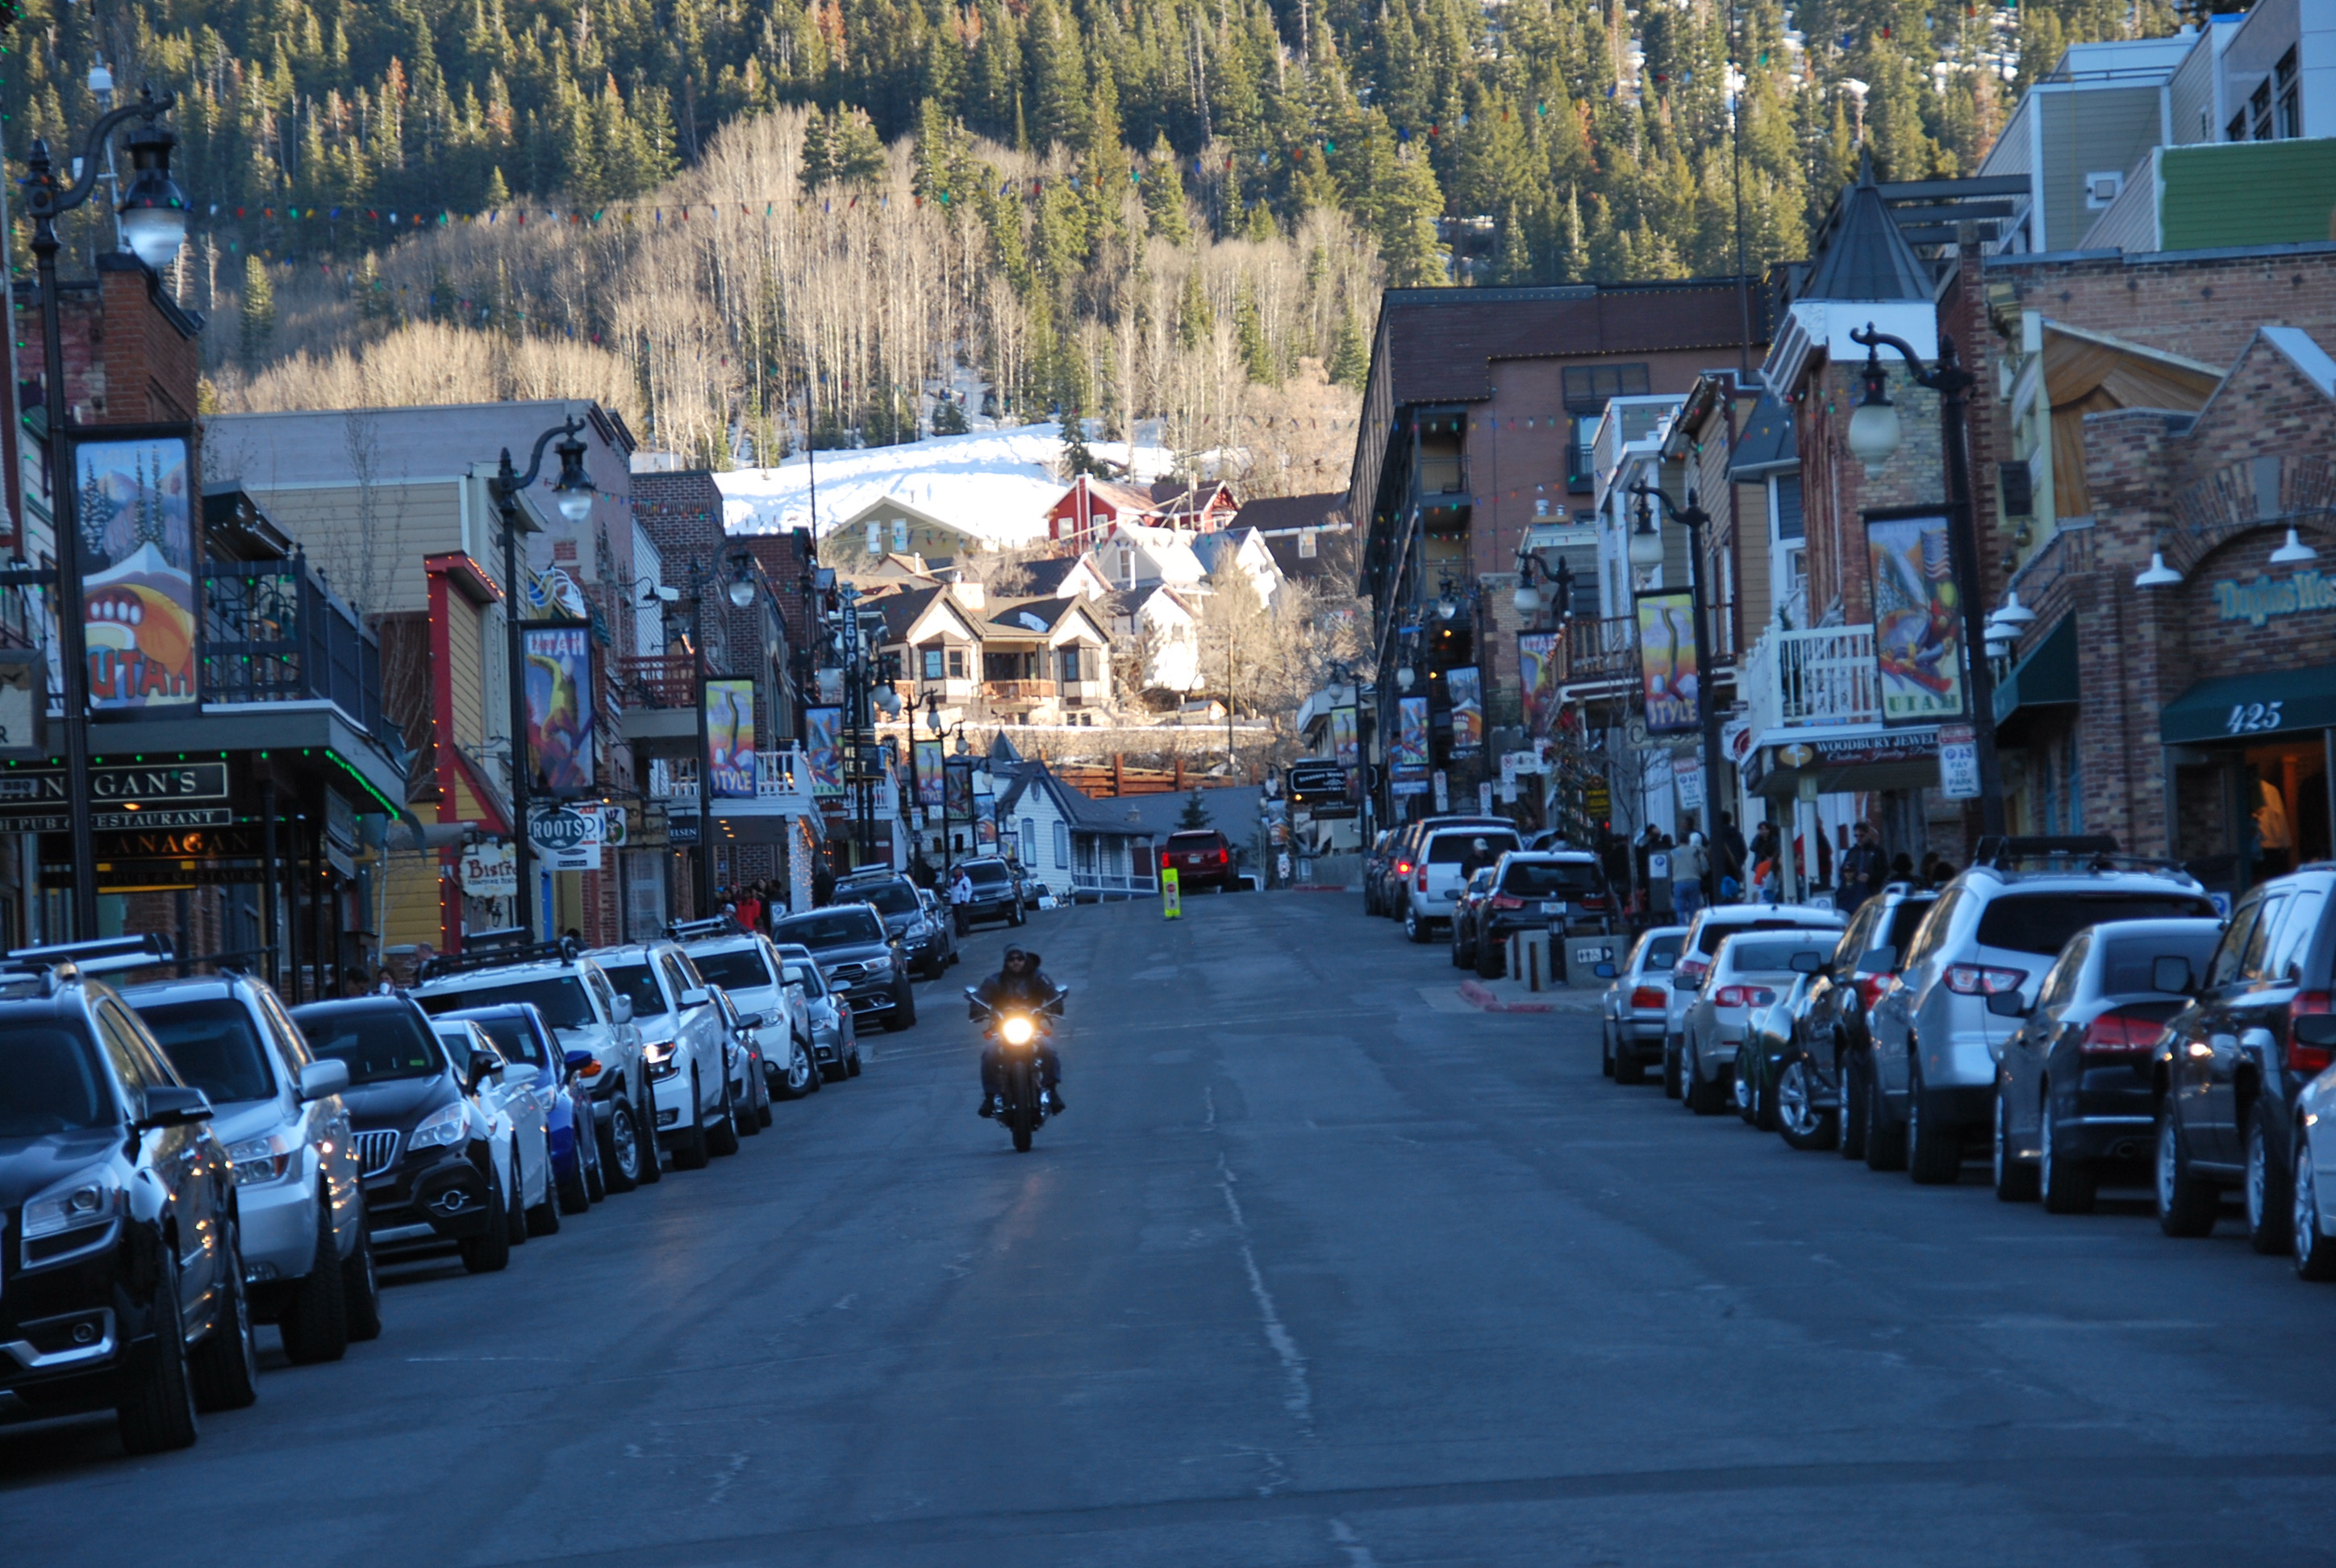 How Beer Saved Park City – Part II